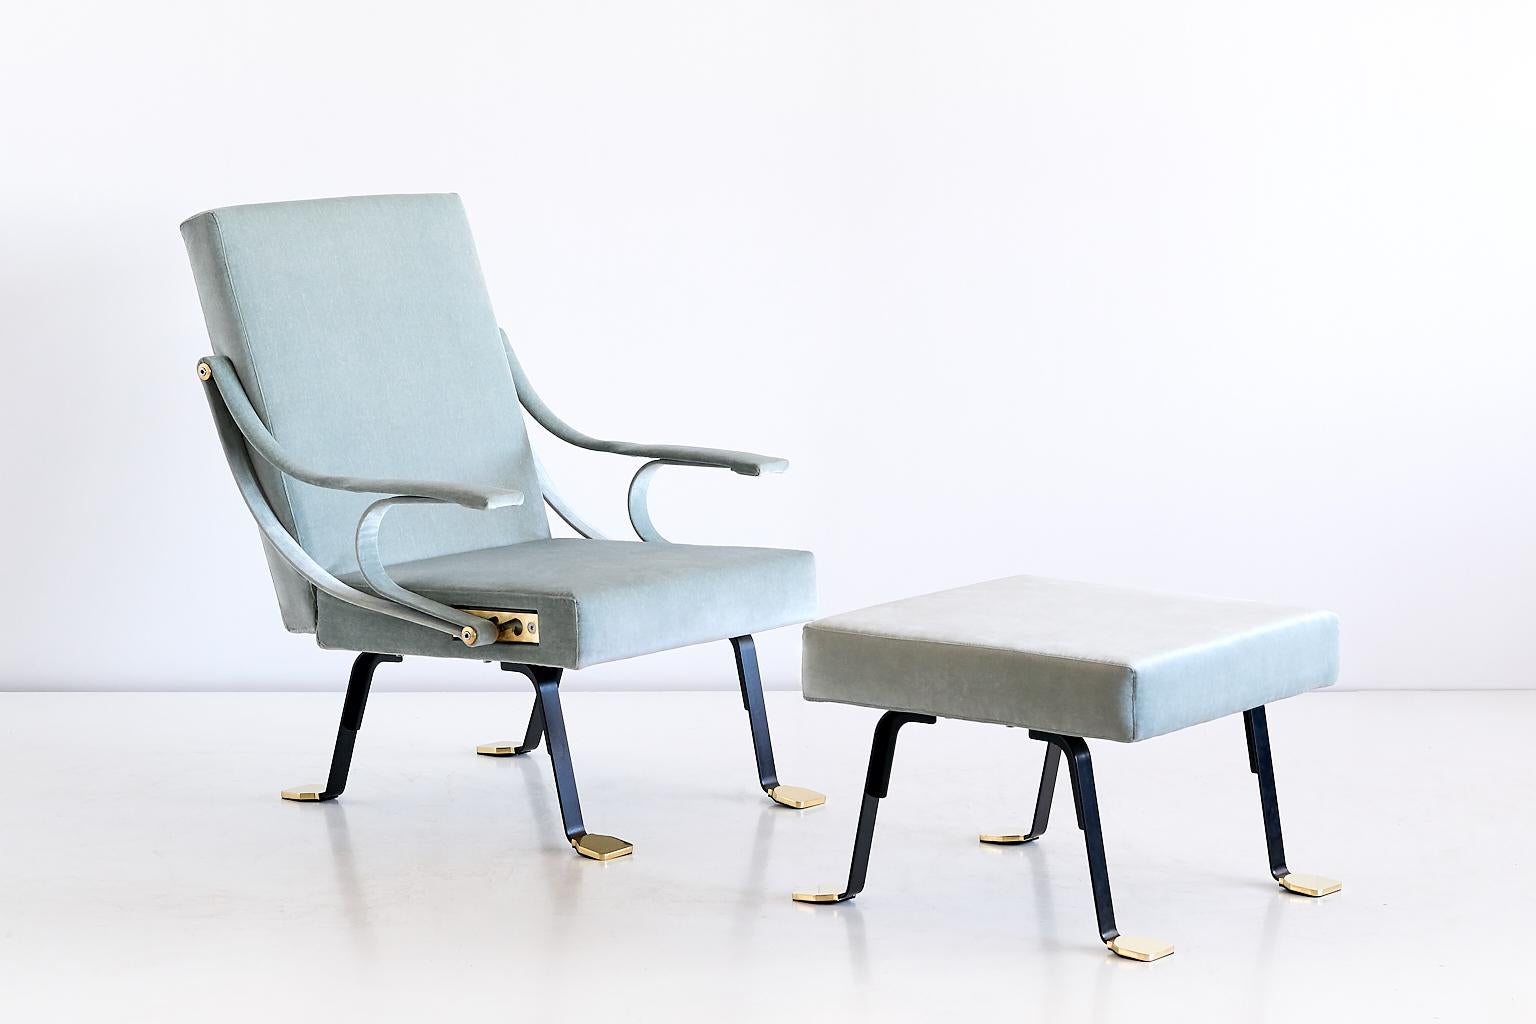 Designed by Ignazio Gardella in 1957, the Digamma lounge chair is a comfortable chair with roots in the late Italian modernist tradition. Its rational construction features two geometric sections - the rectangular upholstered back and seat - bound